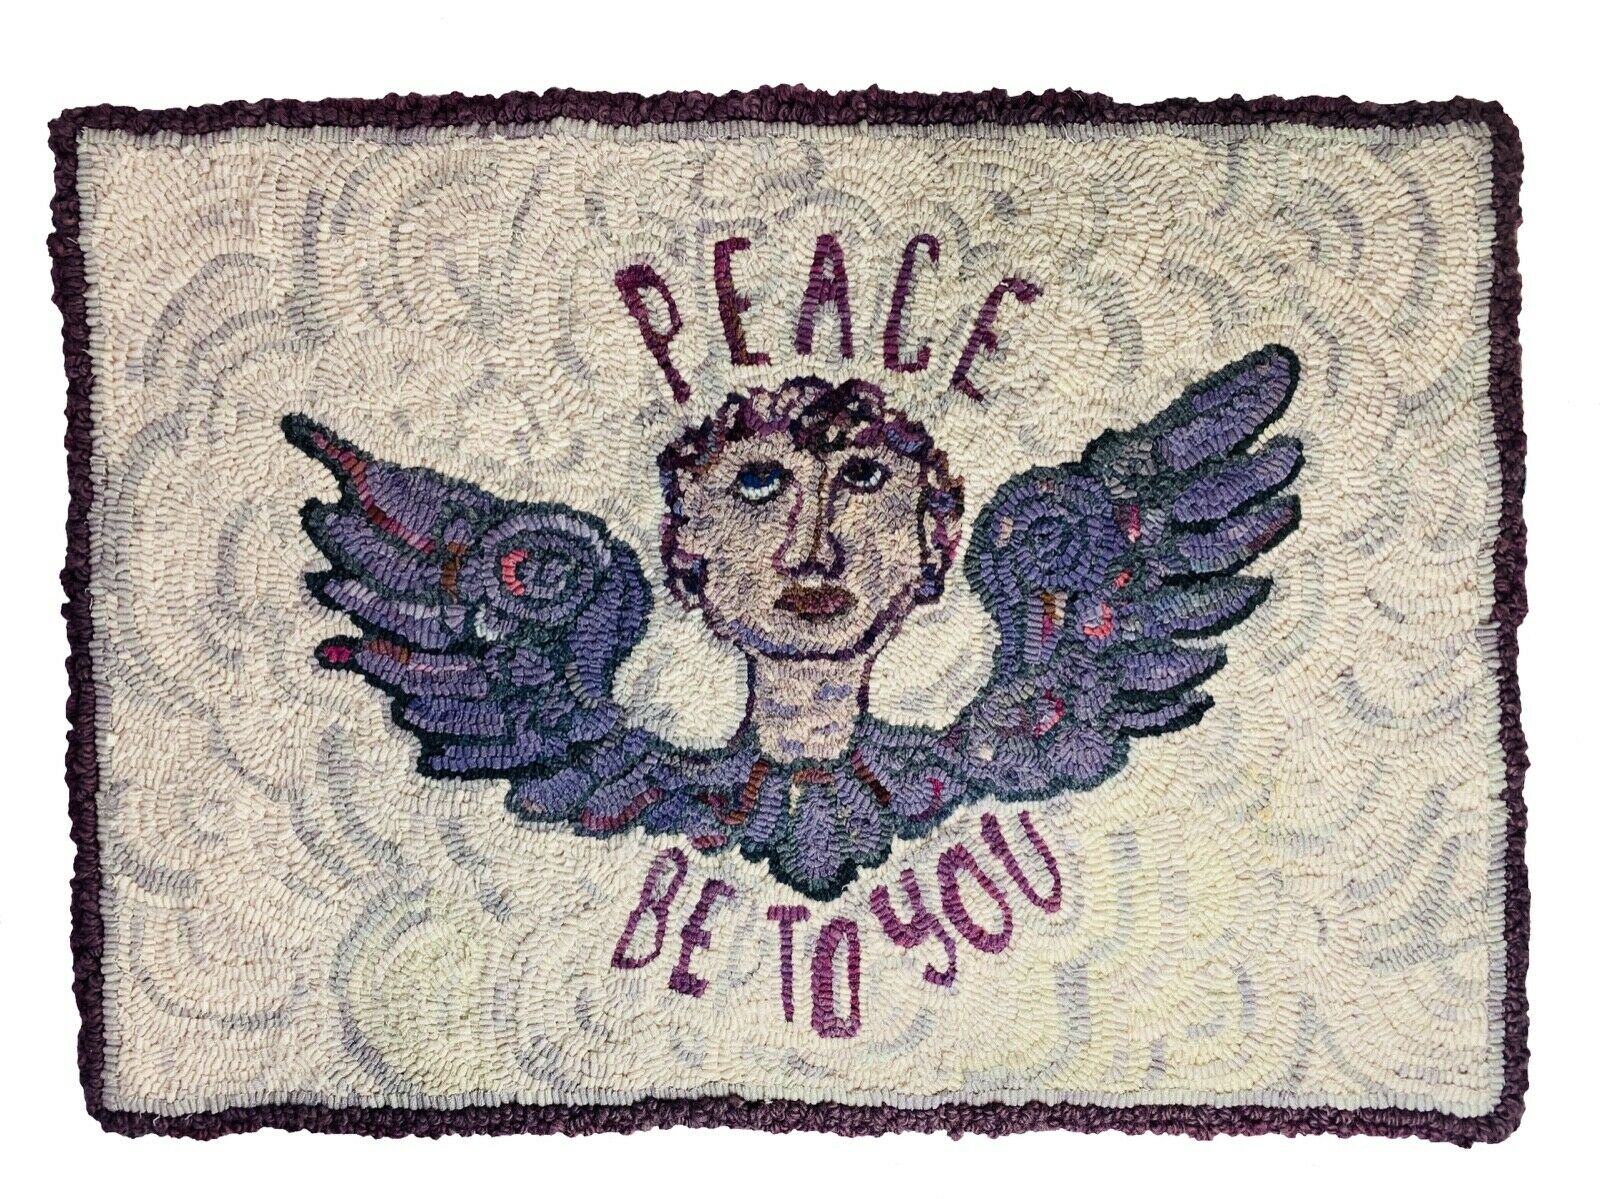 Contemporary American Hooked Rug—peace Be To You—ellen Banker Original Design